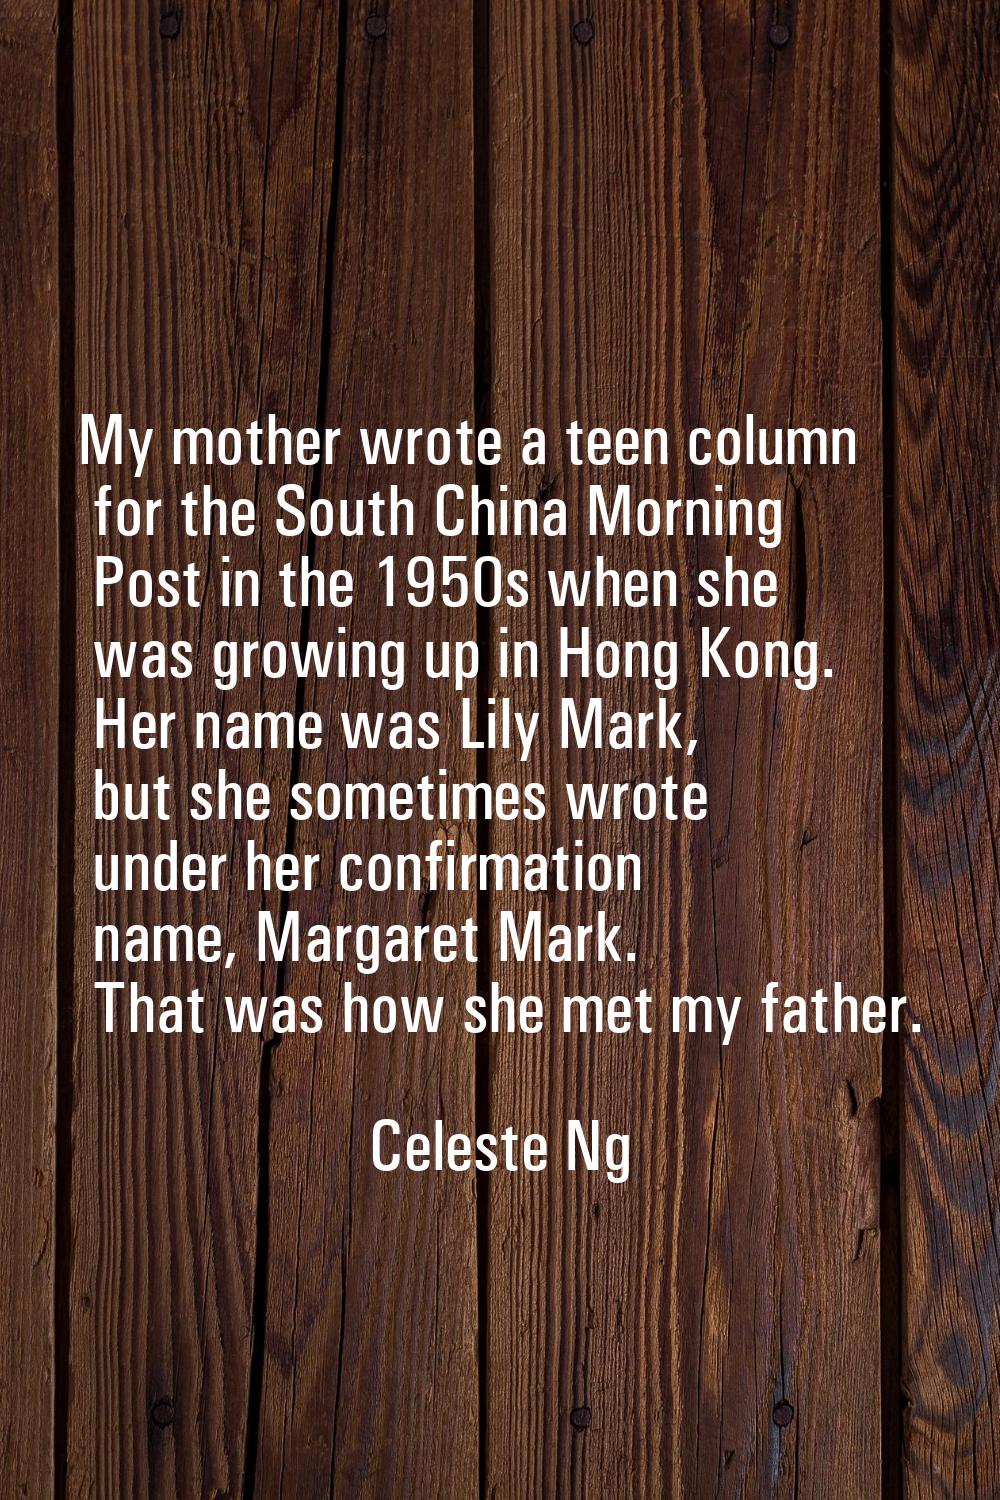 My mother wrote a teen column for the South China Morning Post in the 1950s when she was growing up